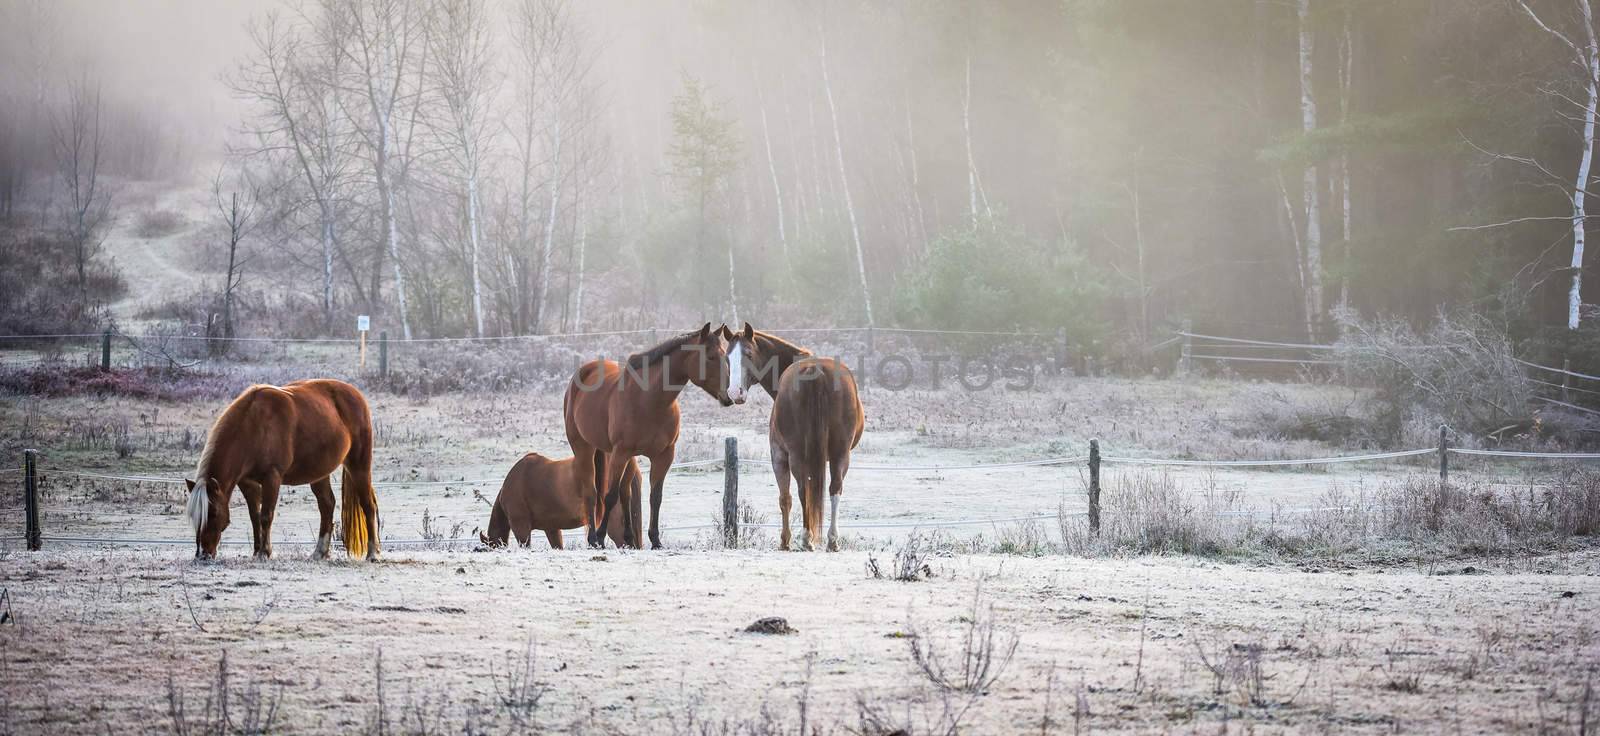 A frosty November morning finds horses in a corral , grazing, relaxing and welcoming the early sunrise.